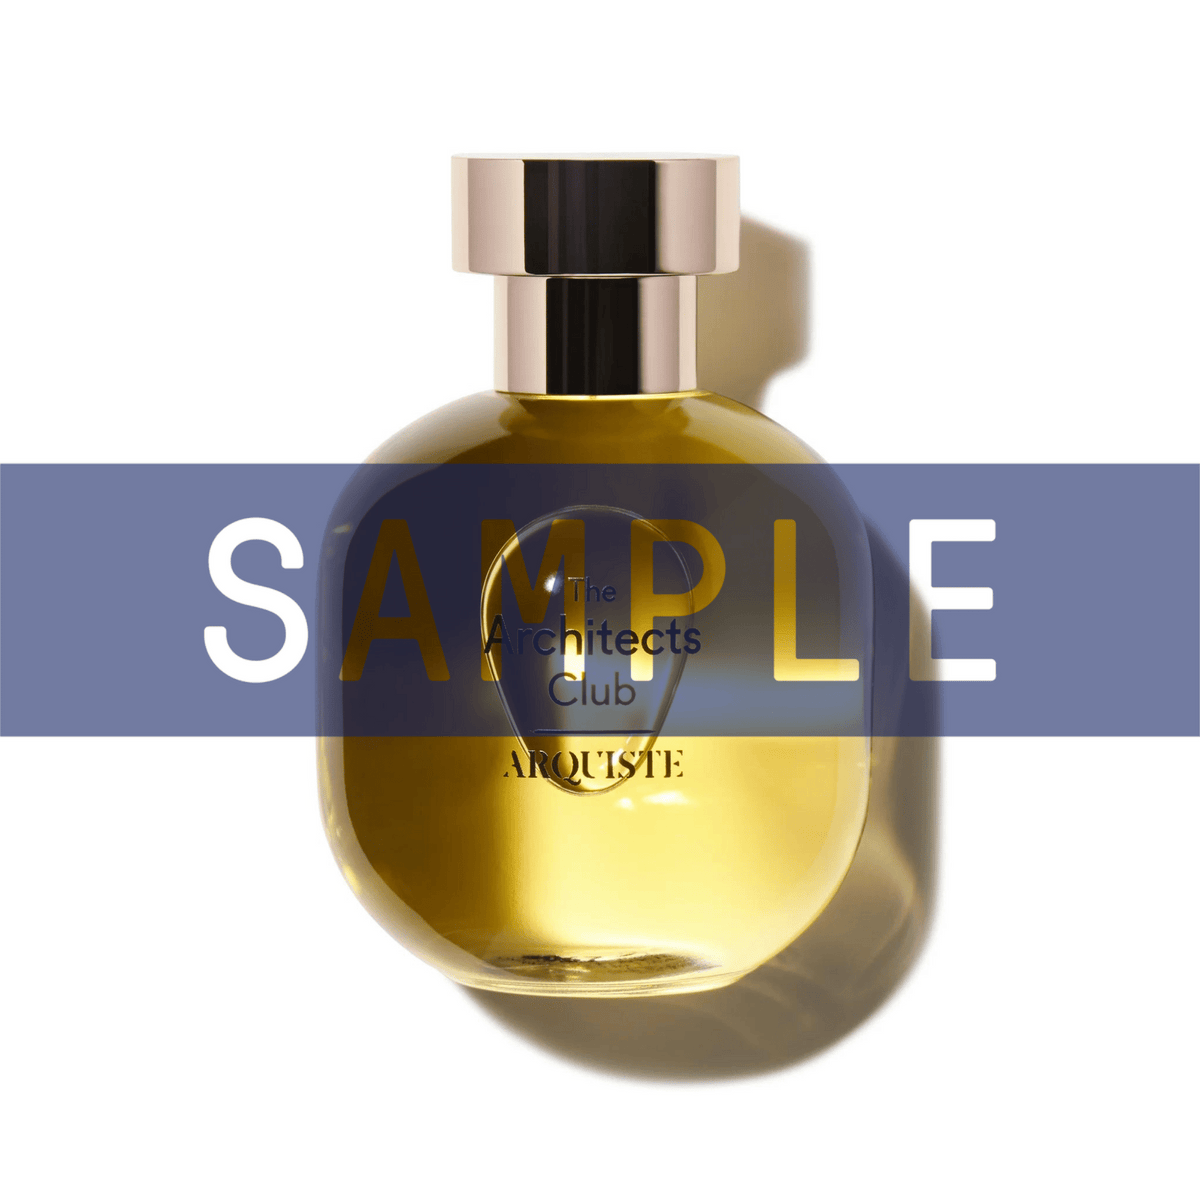 Primary Image of Sample - The Architects Club EDP